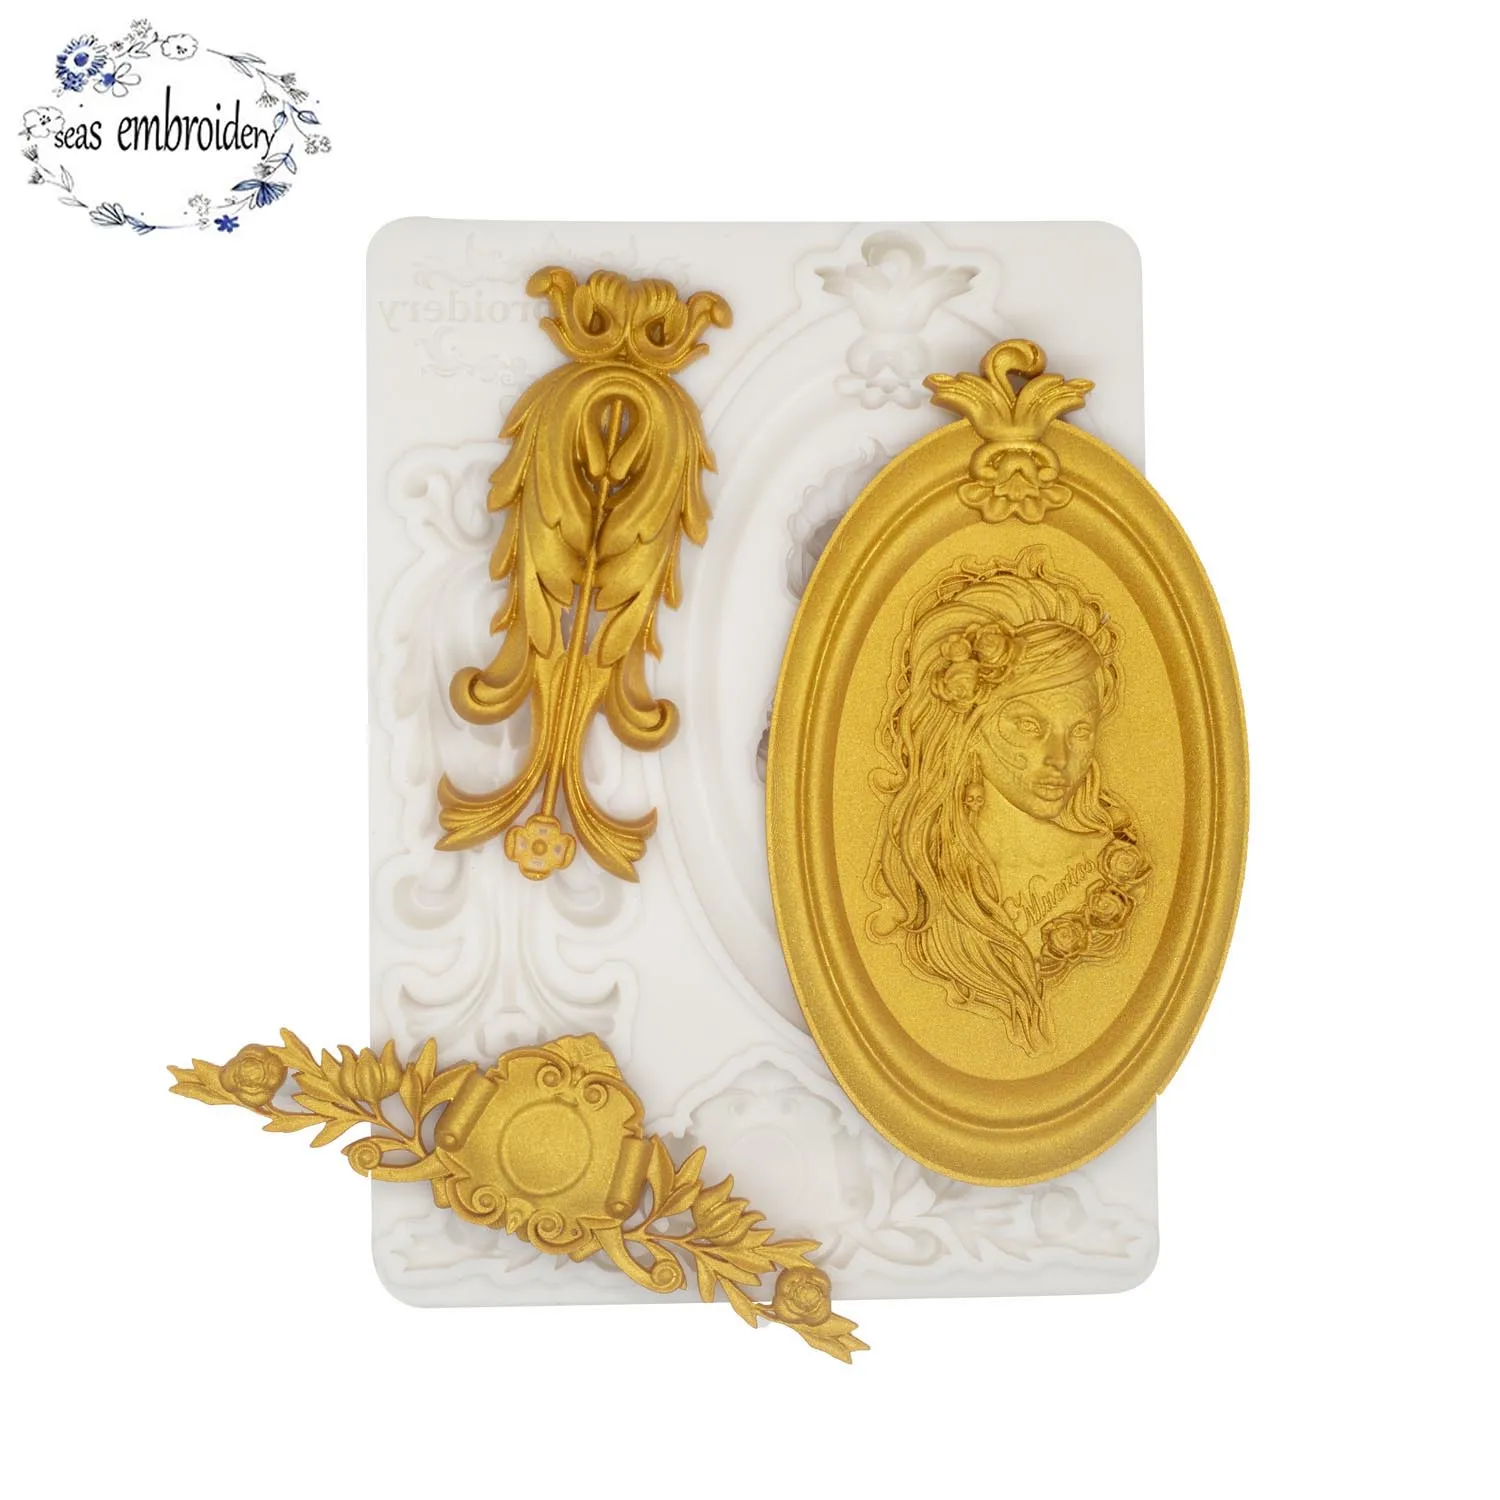 

Photo Frame Baroque Fondant Molds Scroll Border Lace Silicone Molds Curlicues Gum Cake Decorating Sugar Craft Polymer Clay